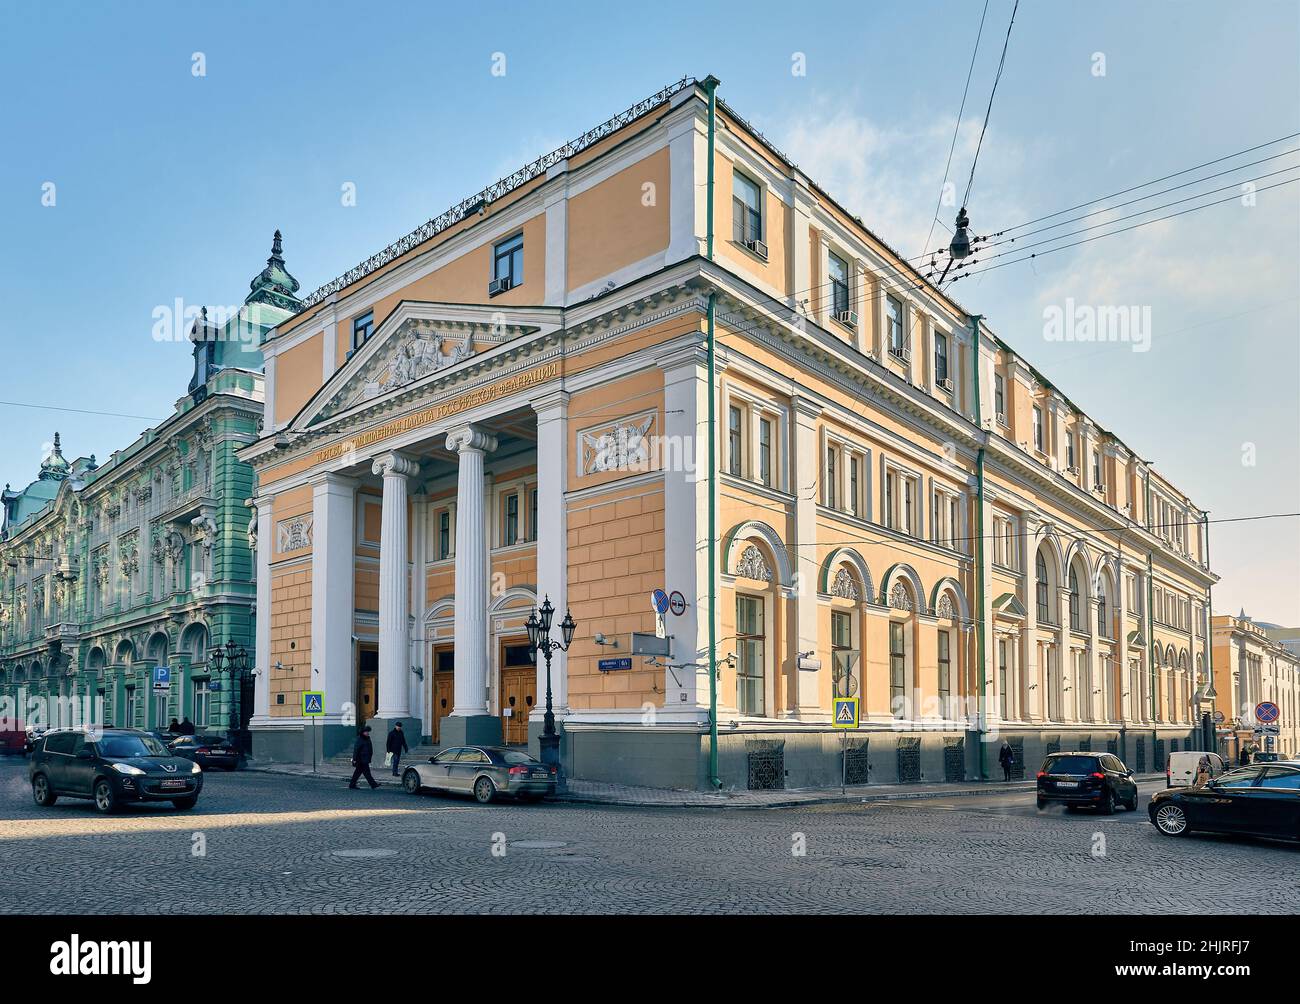 Ilyinka Street, view of the former merchant exchange building, 1836, now the Chamber of Commerce and Industry of the Russian Federation, landmark: Mos Stock Photo